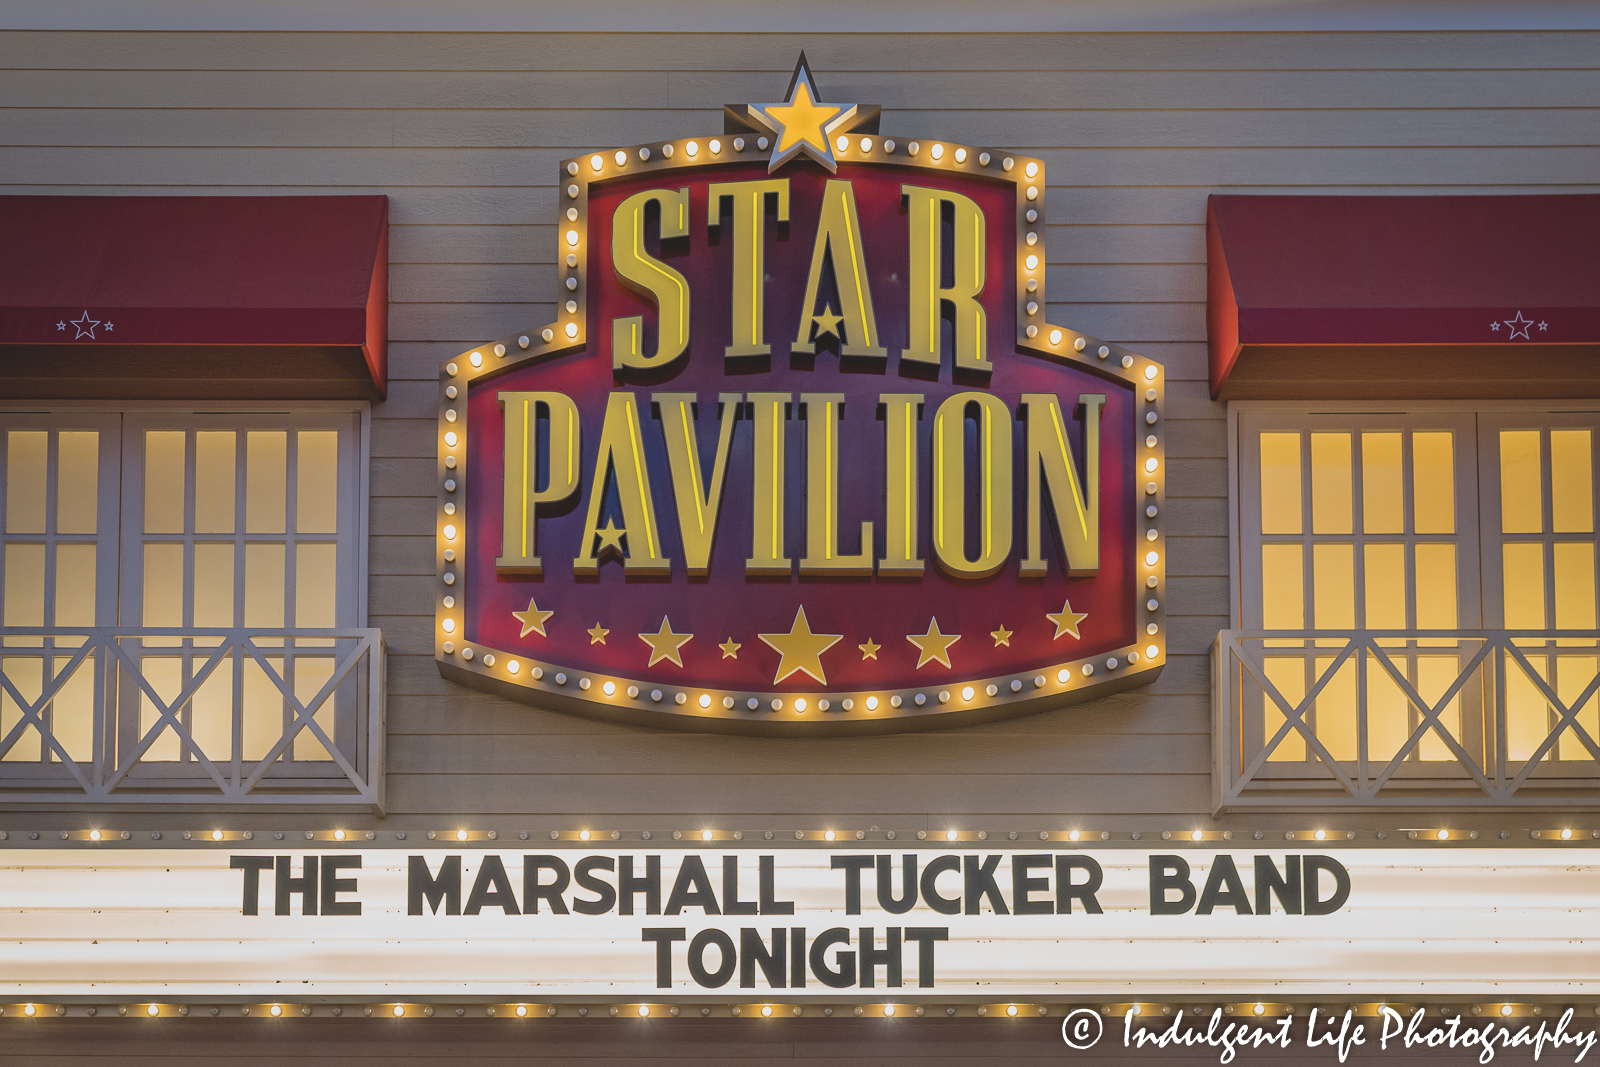 Star Pavilion marquee at Ameristar Casino in Kansas City, MO featuring The Marshall Tucker Band on October 28, 2022.